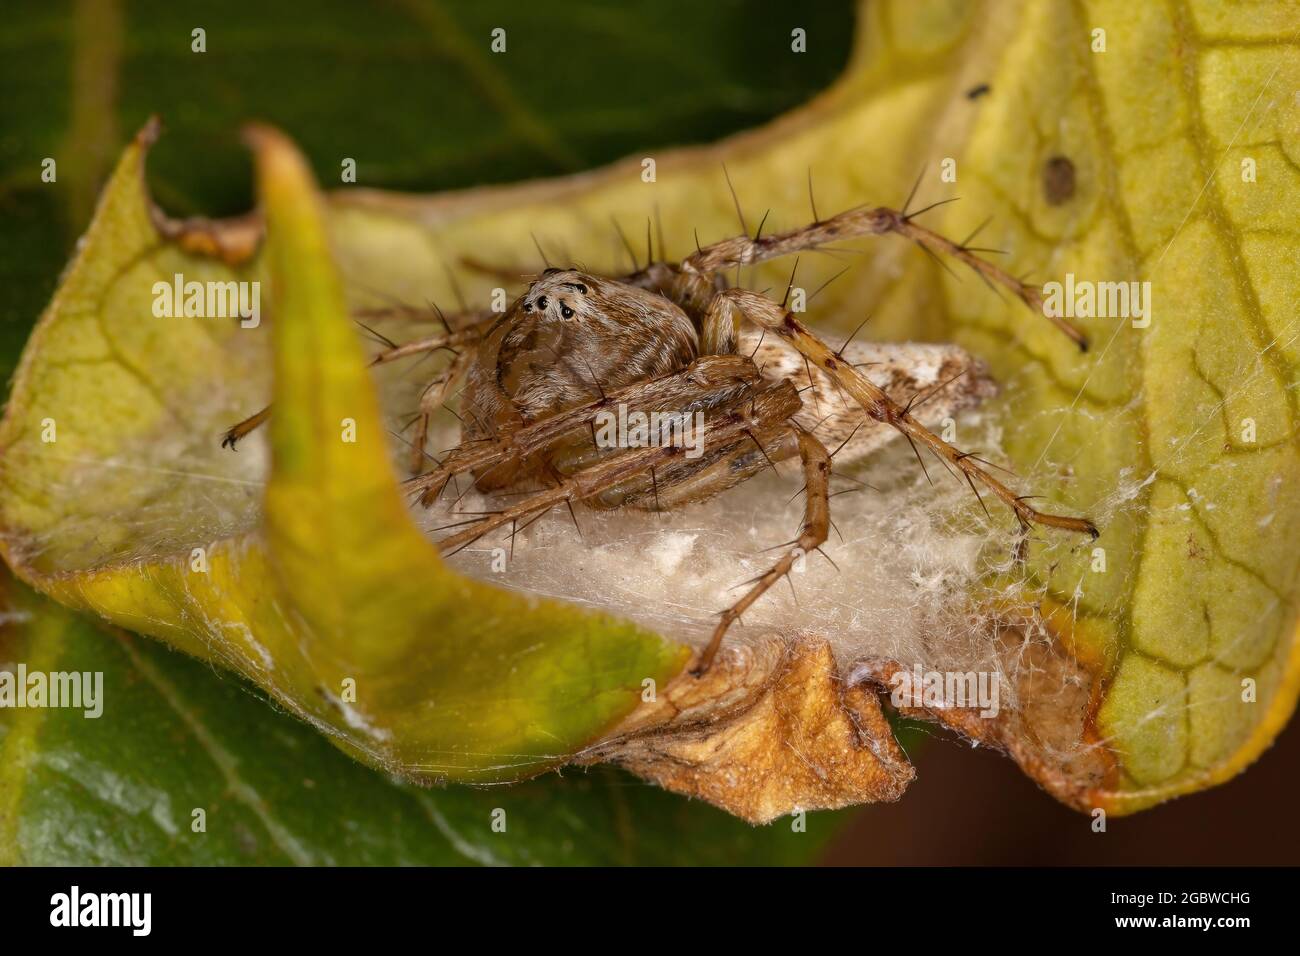 Adult Female Striped Lynx Spider of the genus Oxyopes protecting eggs Stock Photo